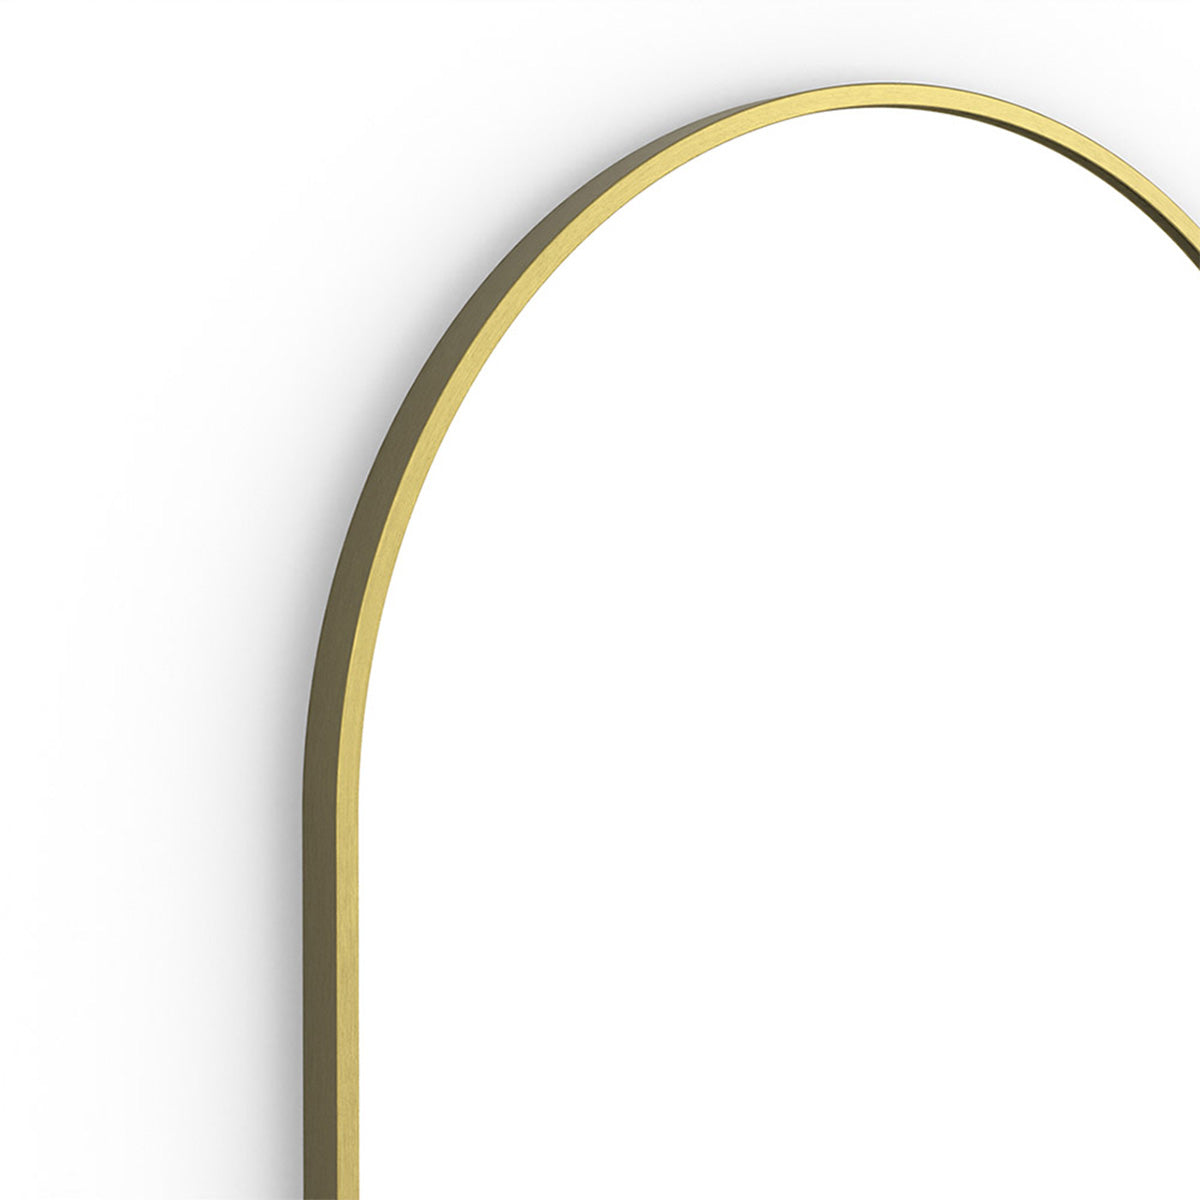 Harbour Arch Mirror Brushed Brass 50x80cm